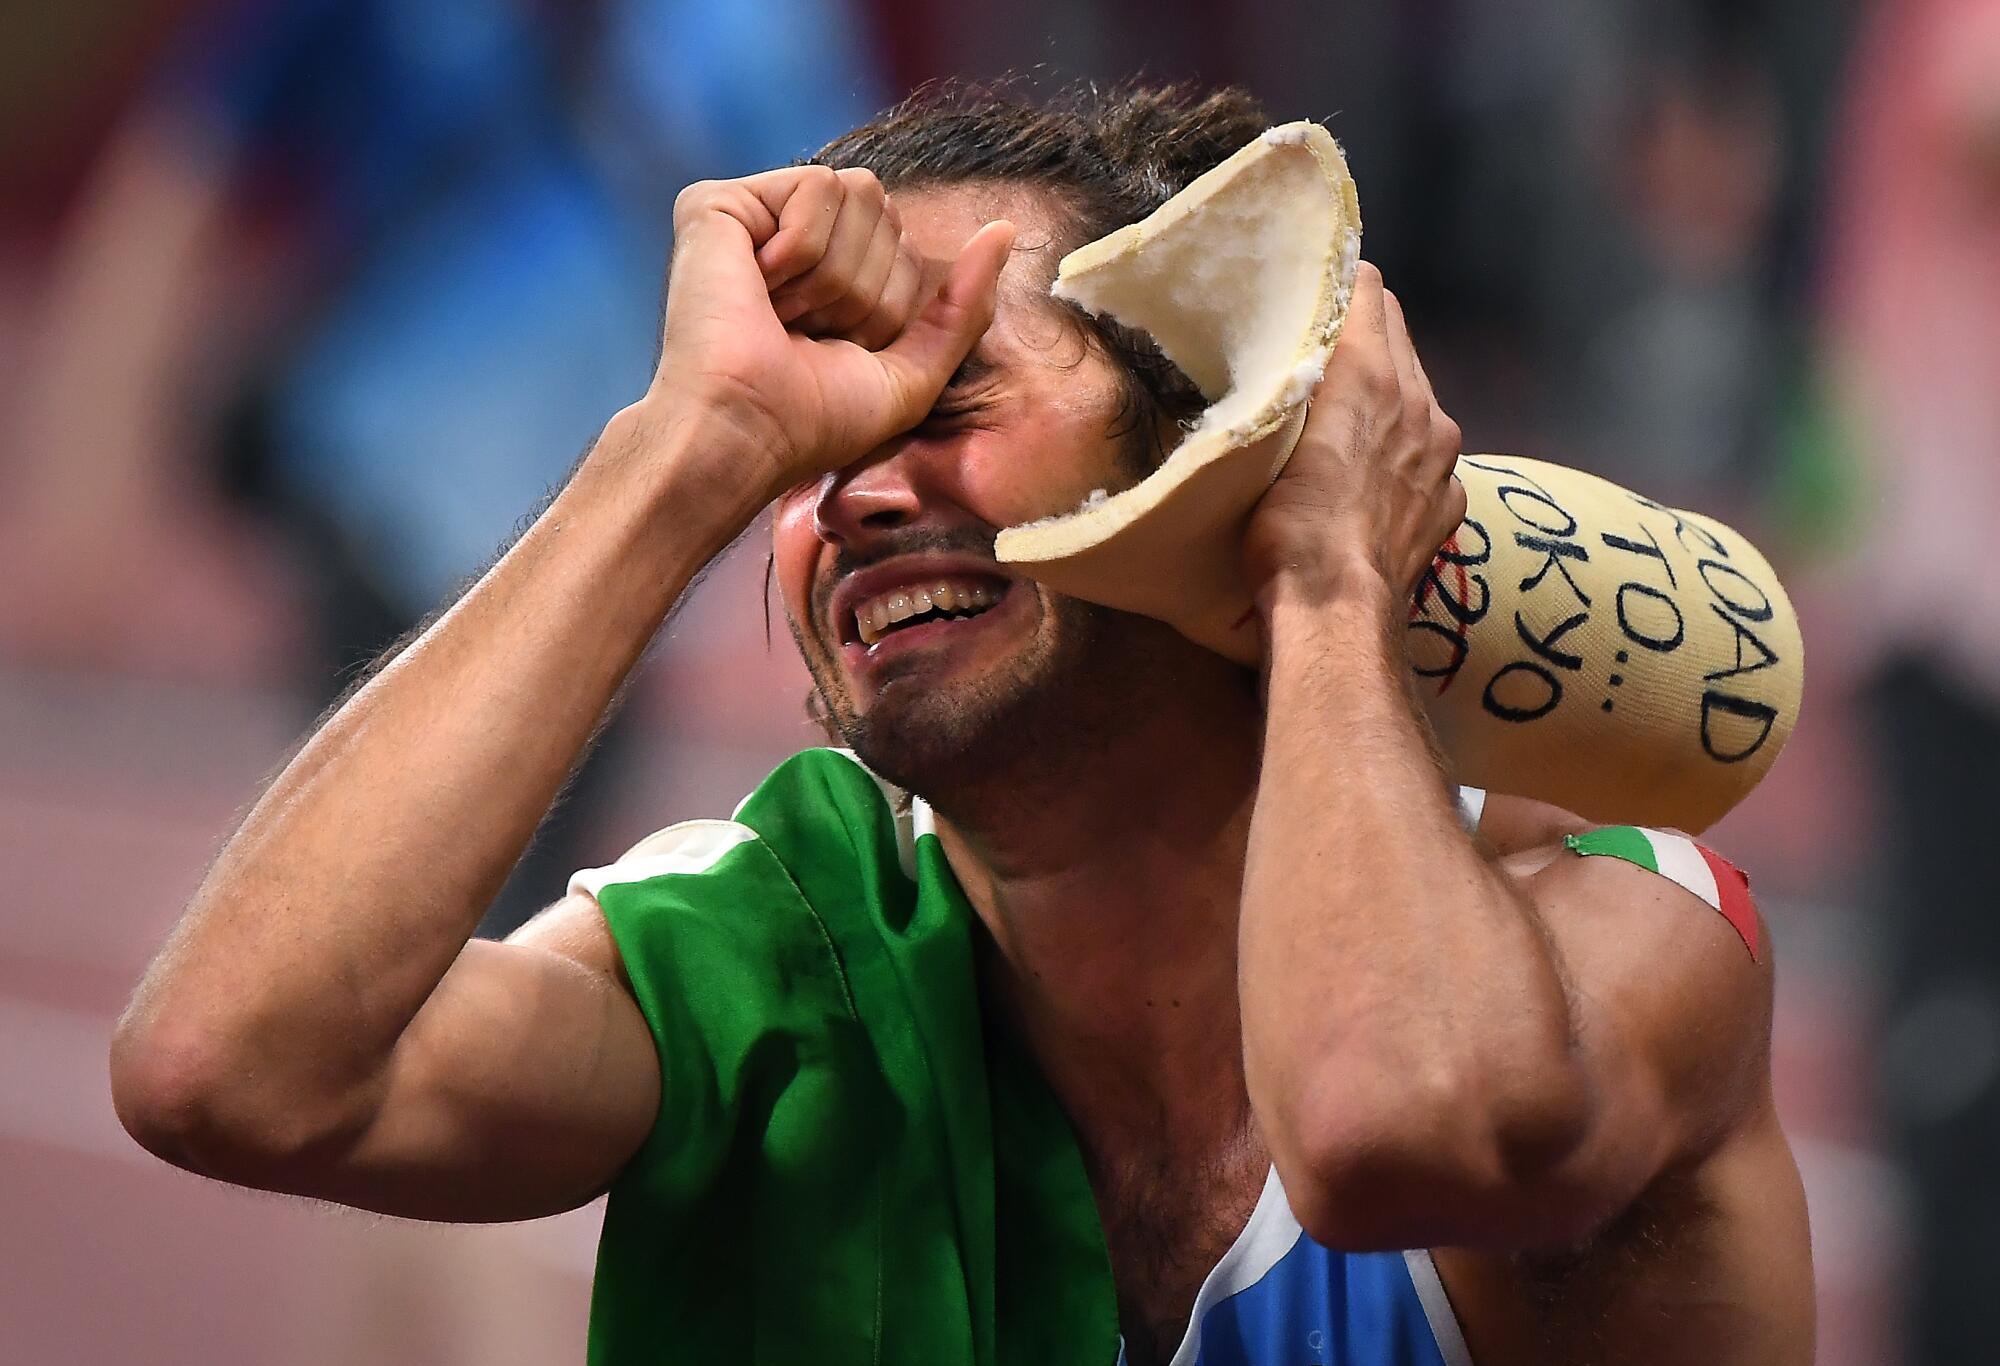 Italy's Gianmarco Tamberi celebrates his gold medal in the high jump by holding a cast from an ankle injury.